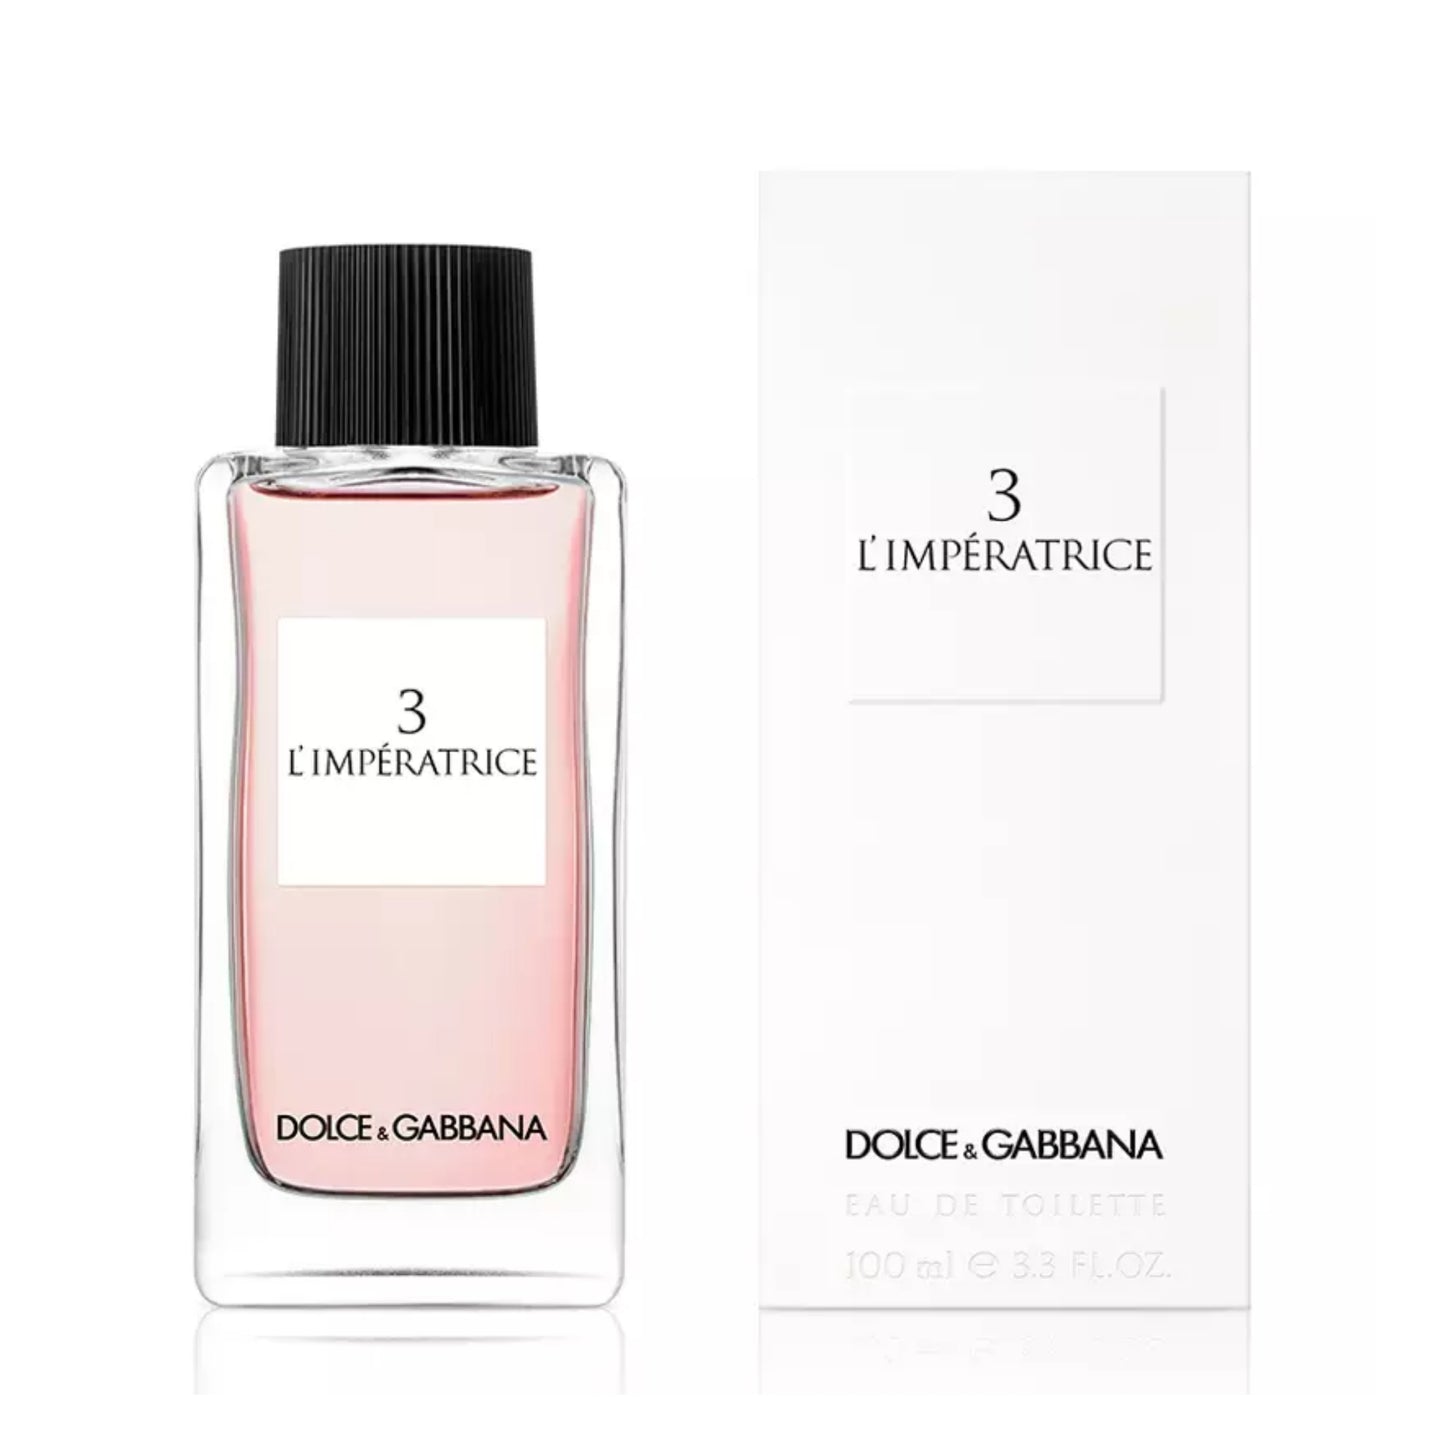 D&G 3 Limperatrice